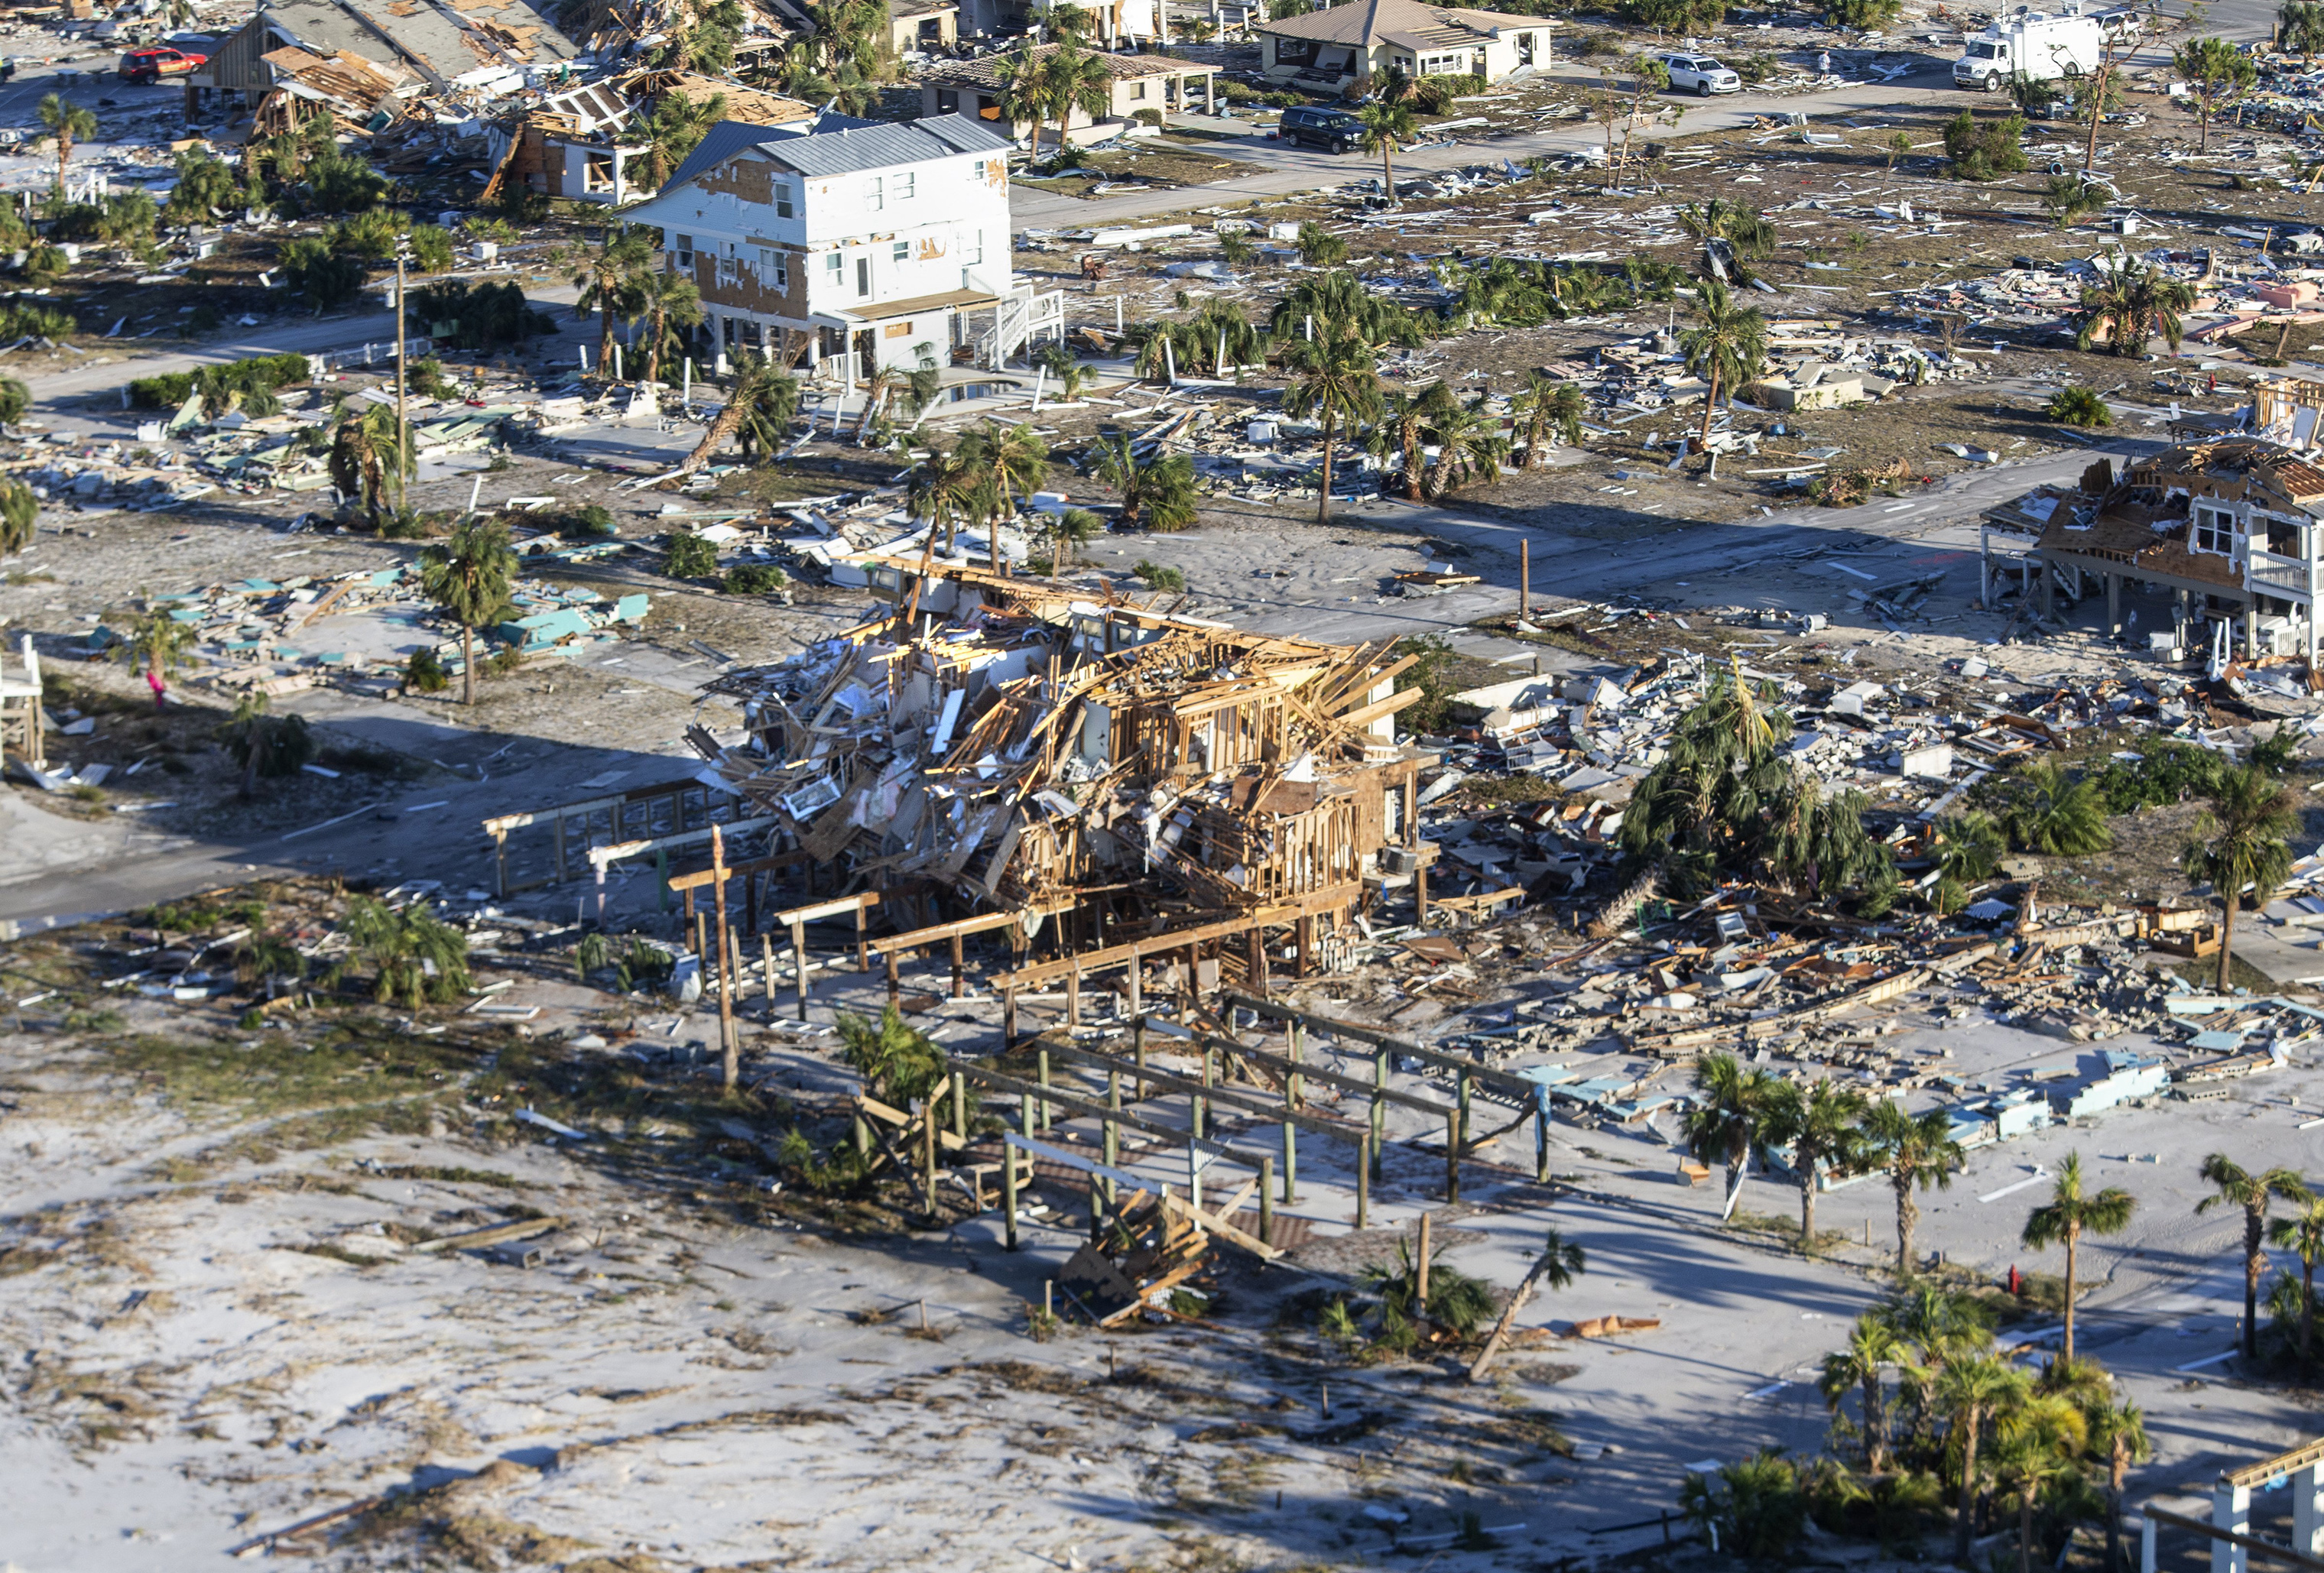 Homes and businesses along U.S. 98 are left in devastation by Hurricane Michael on Oct. 12, 2018 in Mexico Beach, Fla. (Mark Wallheiser—Getty Images)